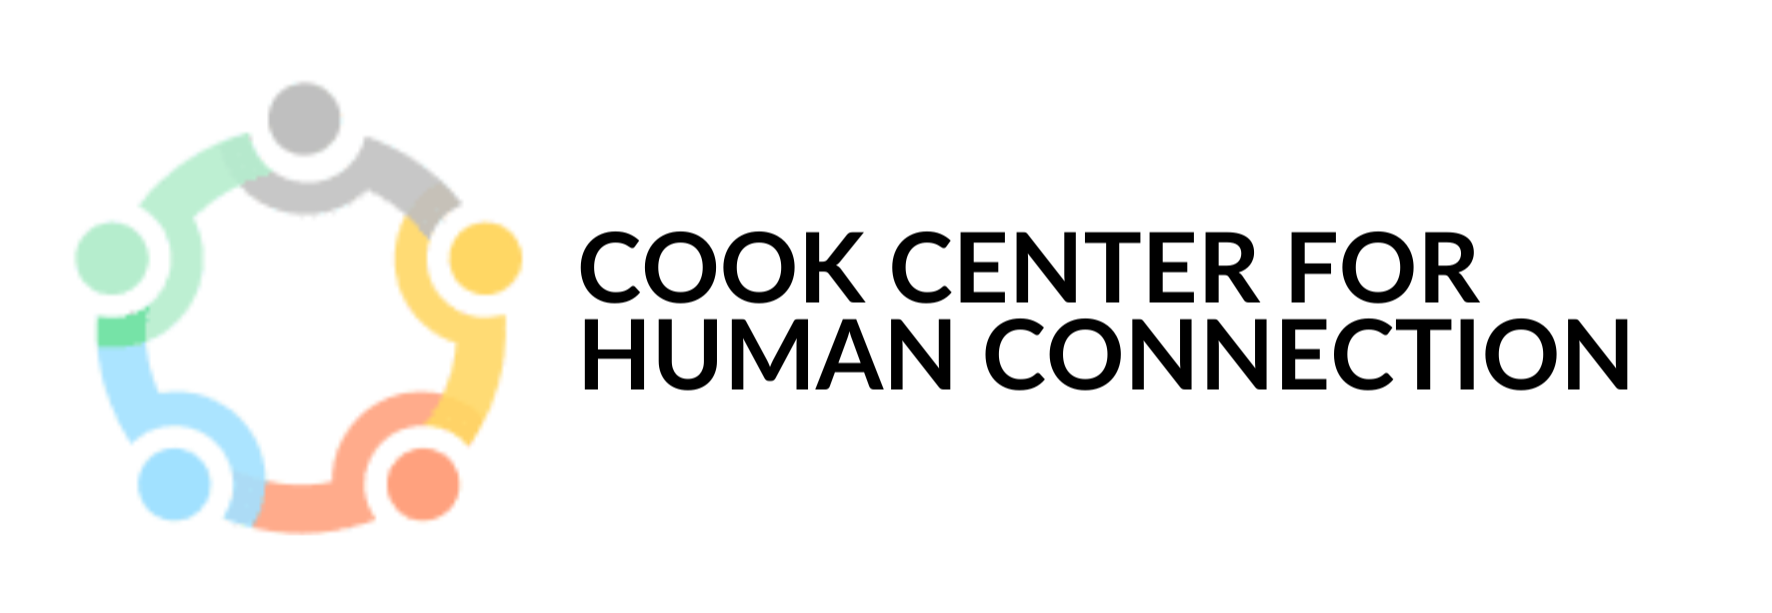 cook center for human connection